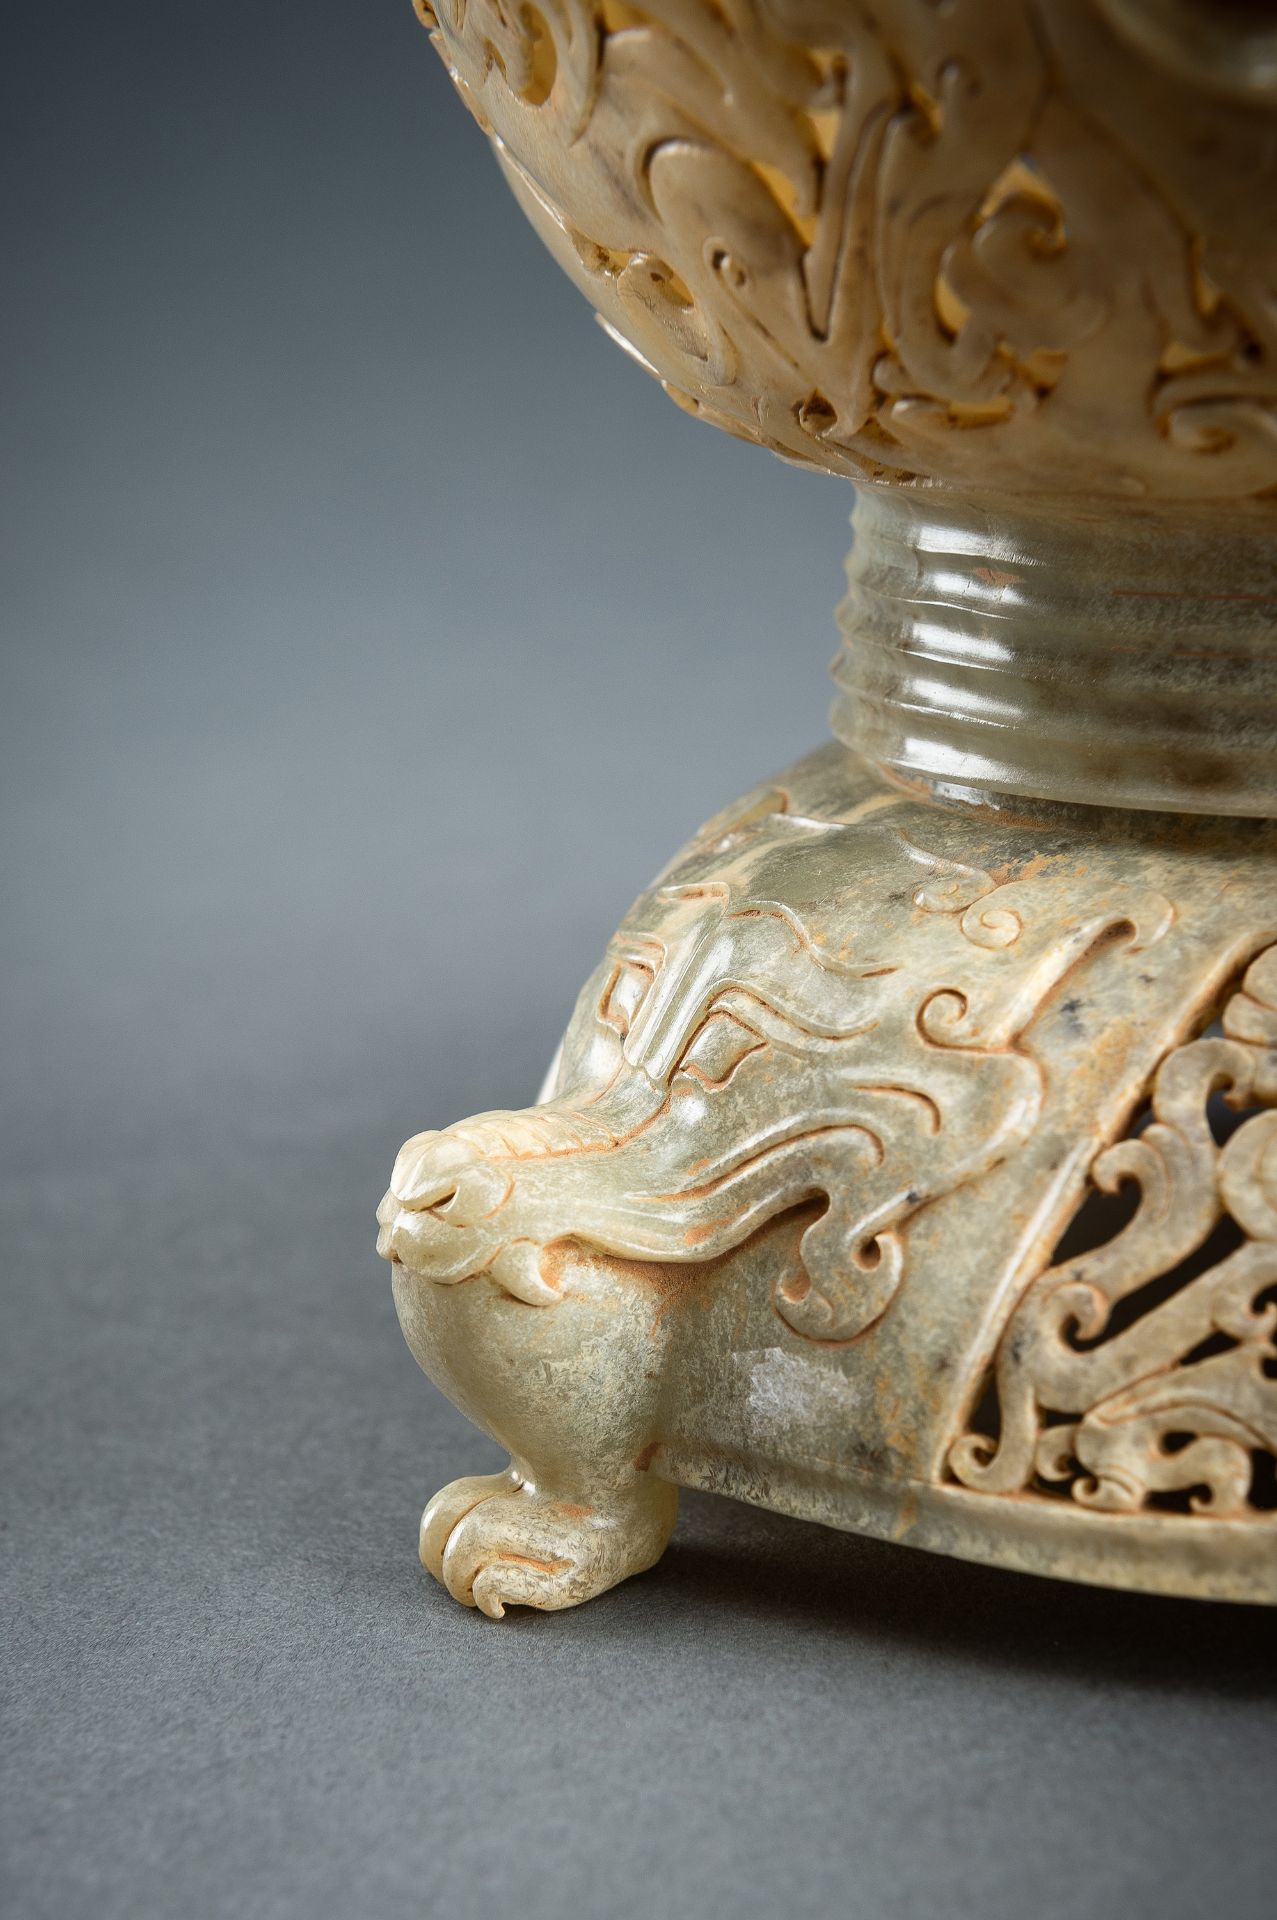 A LARGE AND IMPRESSIVE 3-PART RETICULATED CELADON JADE VESSEL - Image 5 of 19